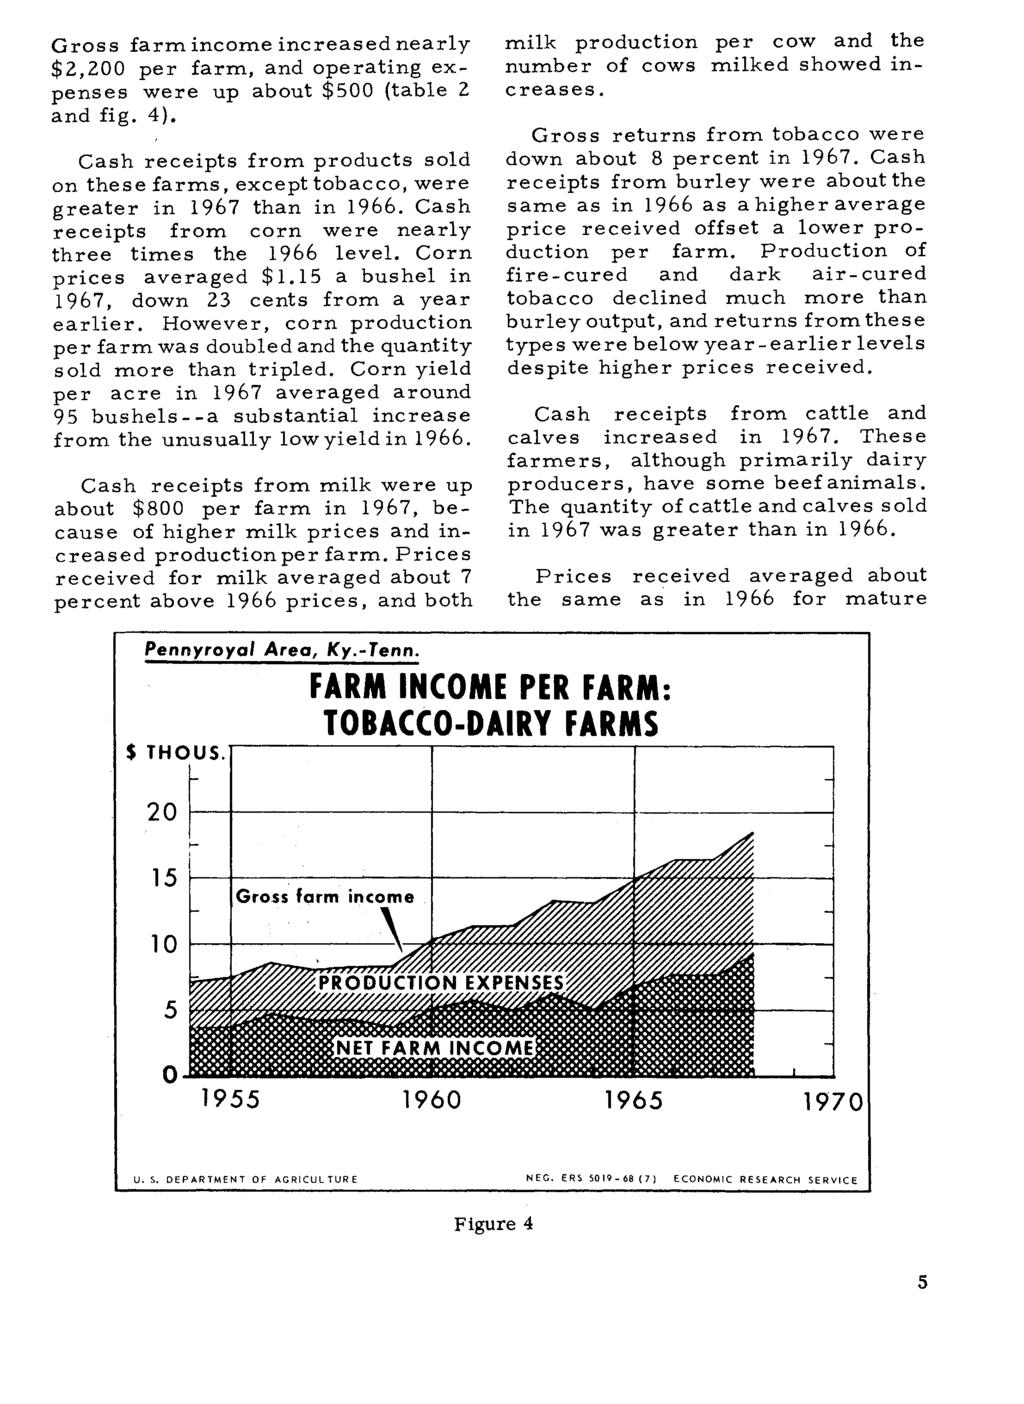 Gross farm income increased nearly $2,200 per farm, and operating expenses were up about $500 (table 2 and fig. 4).